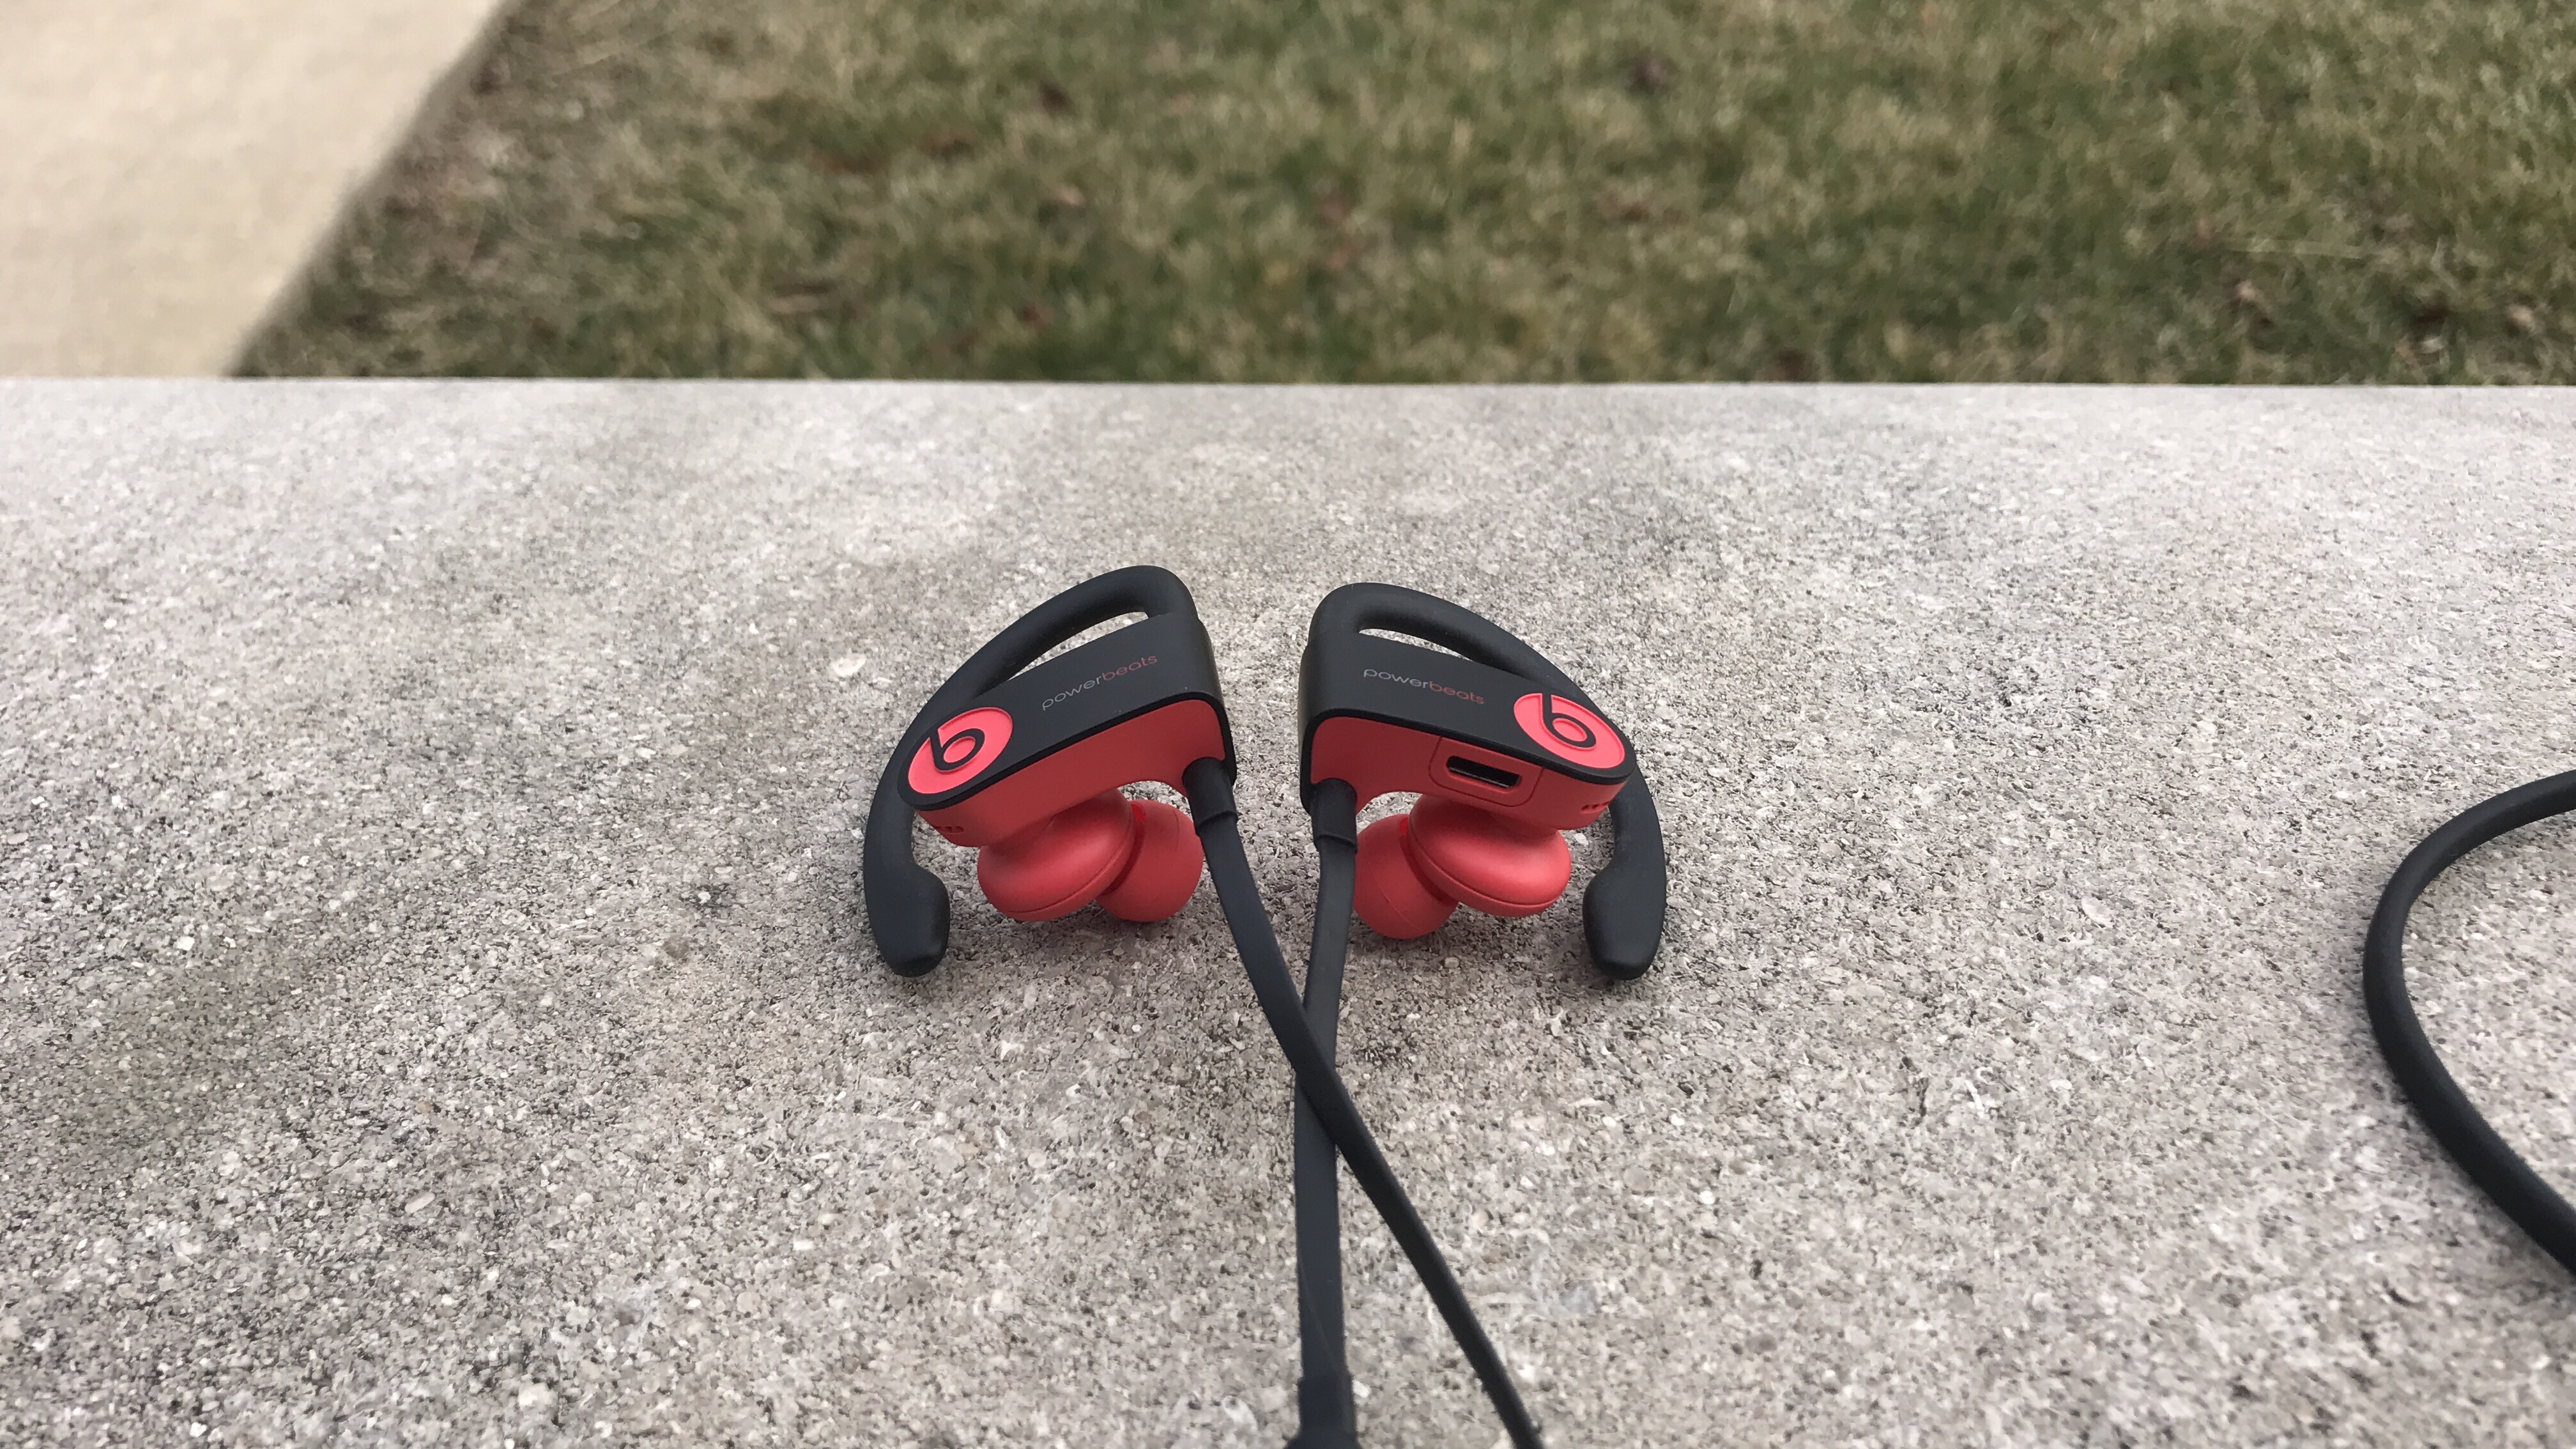 difference between beatsx and powerbeats3